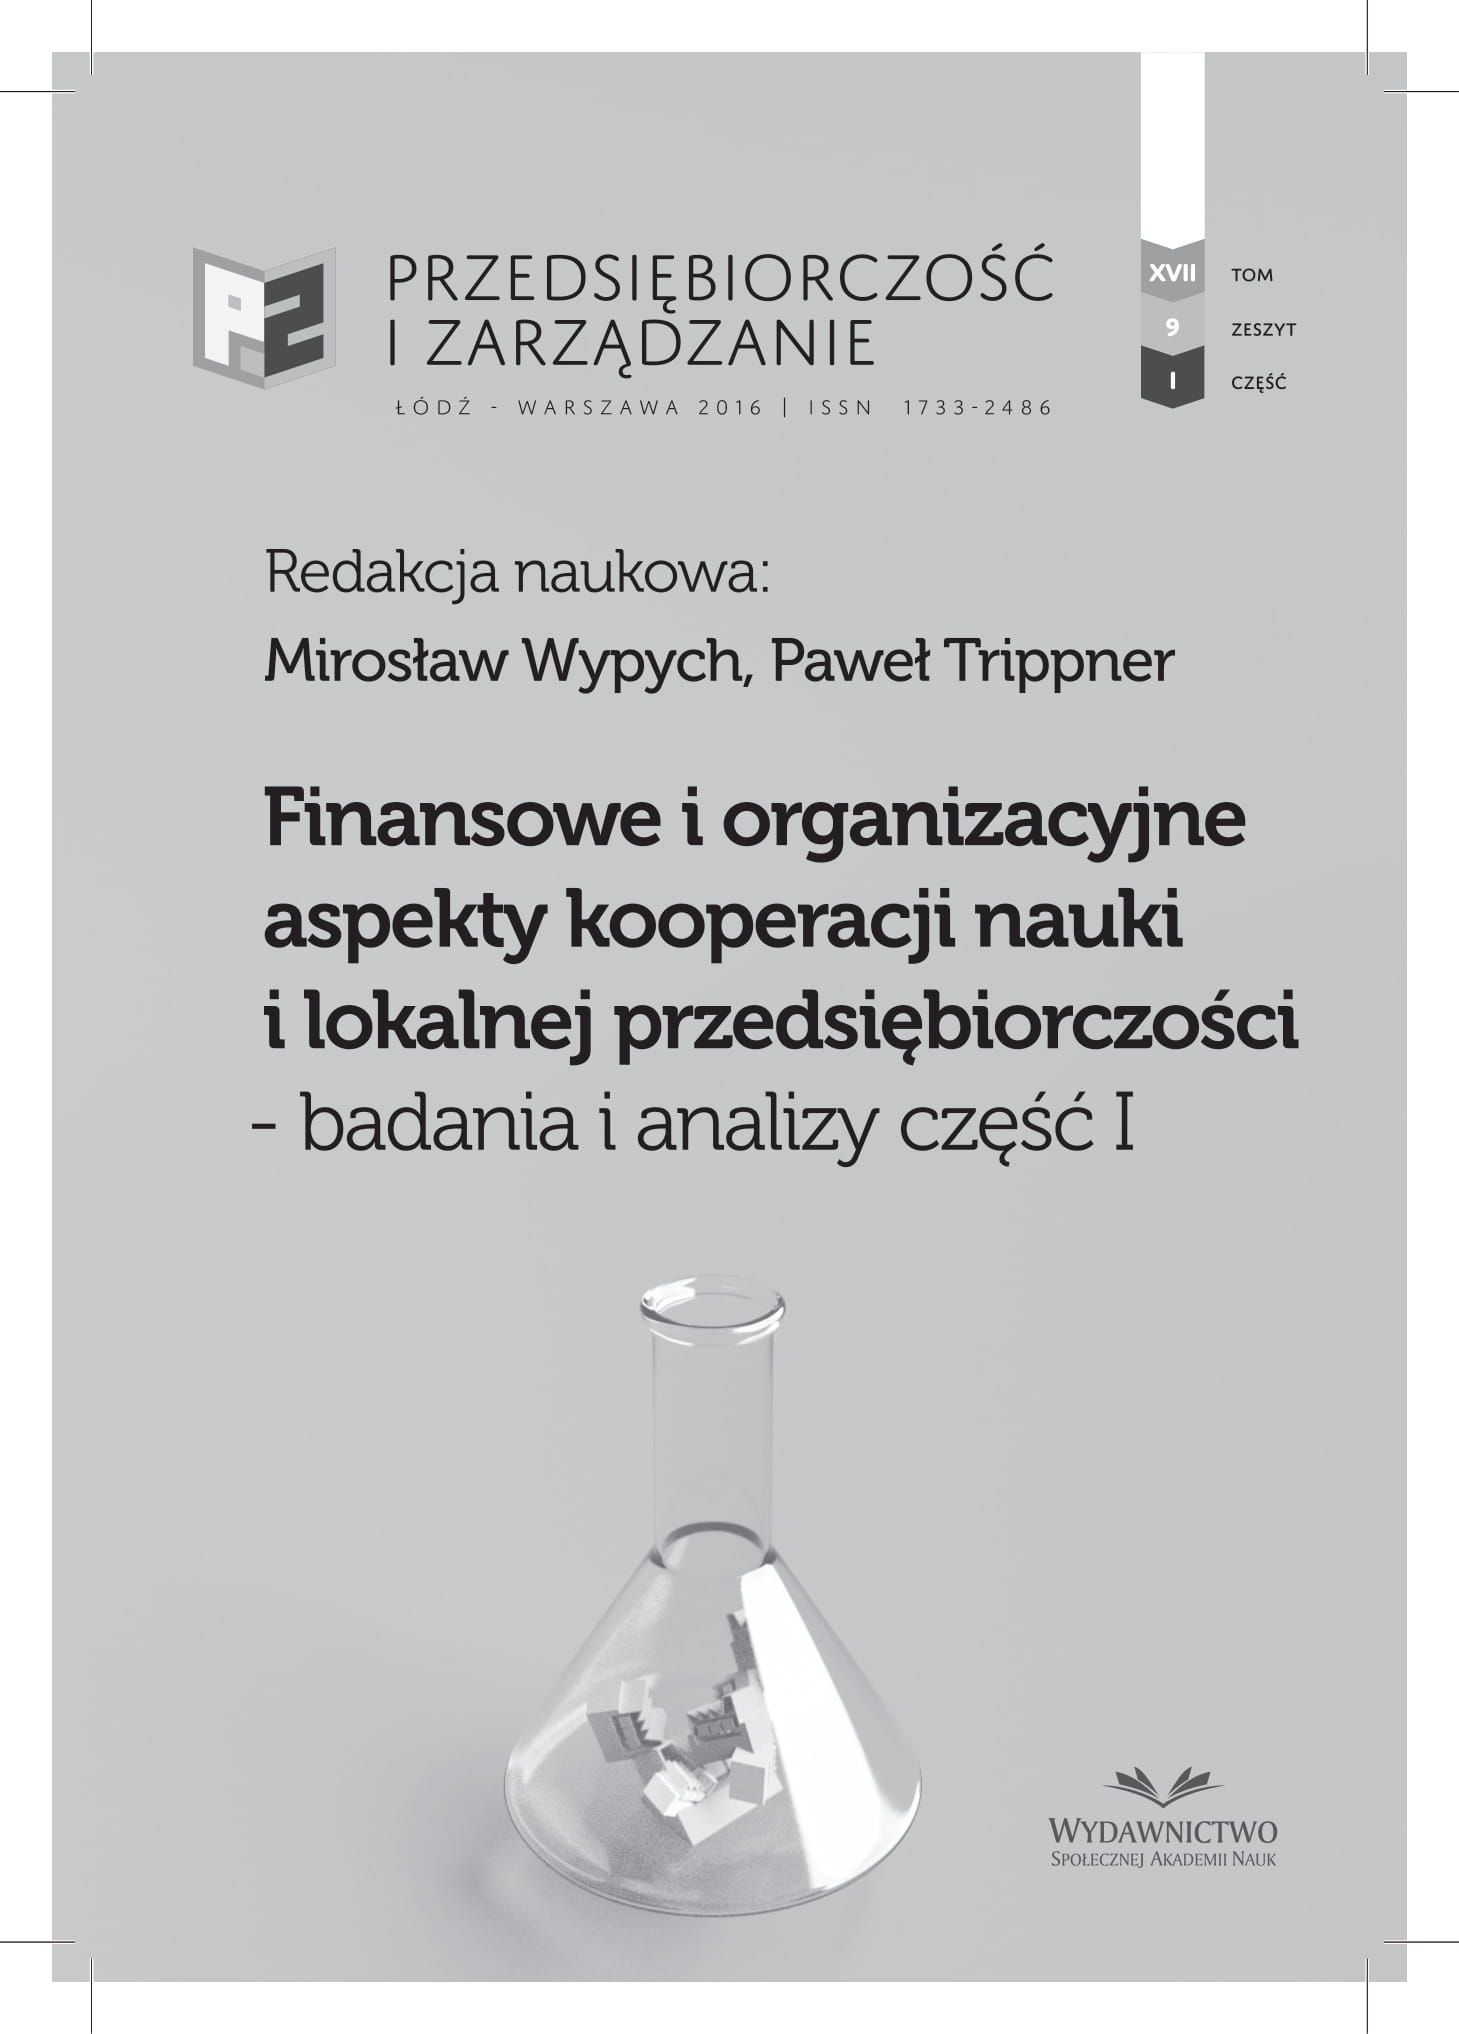 Analysis of Financial Condition of Common Pension Companies in Poland Cover Image